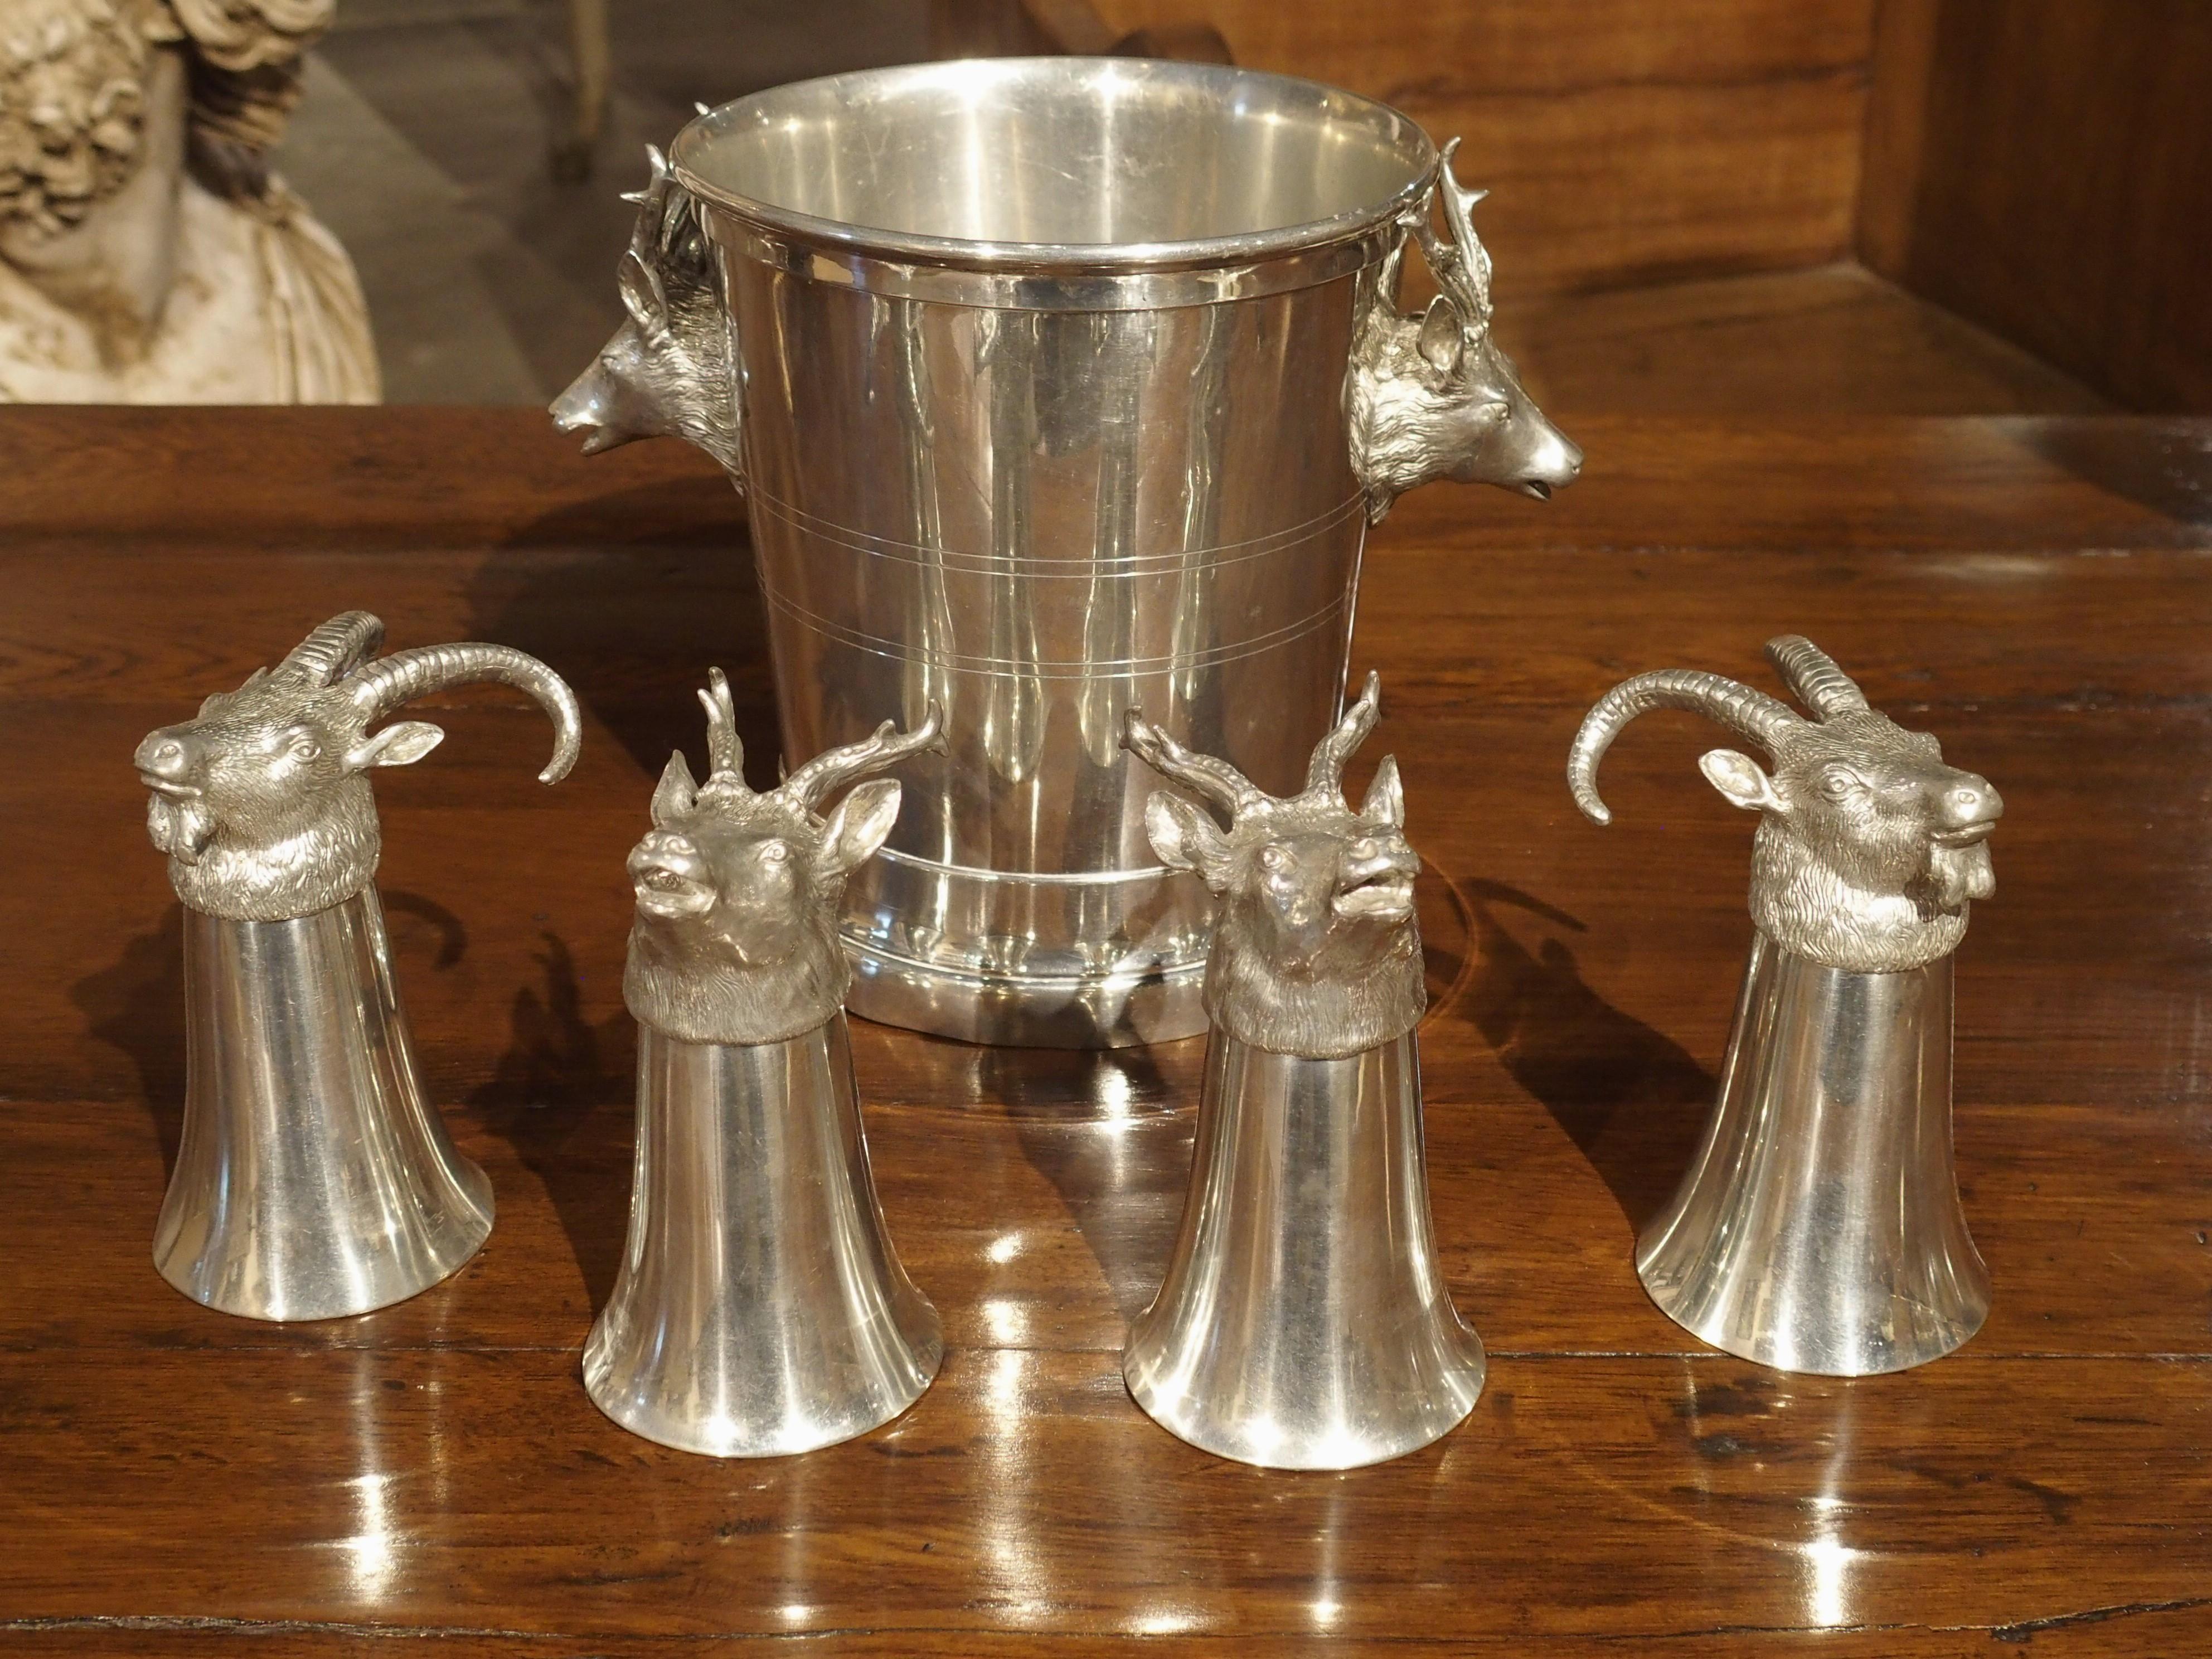 Set of 4 Polished Pewter Stag and Ibex Stirrup Cups with Ice Bucket 15